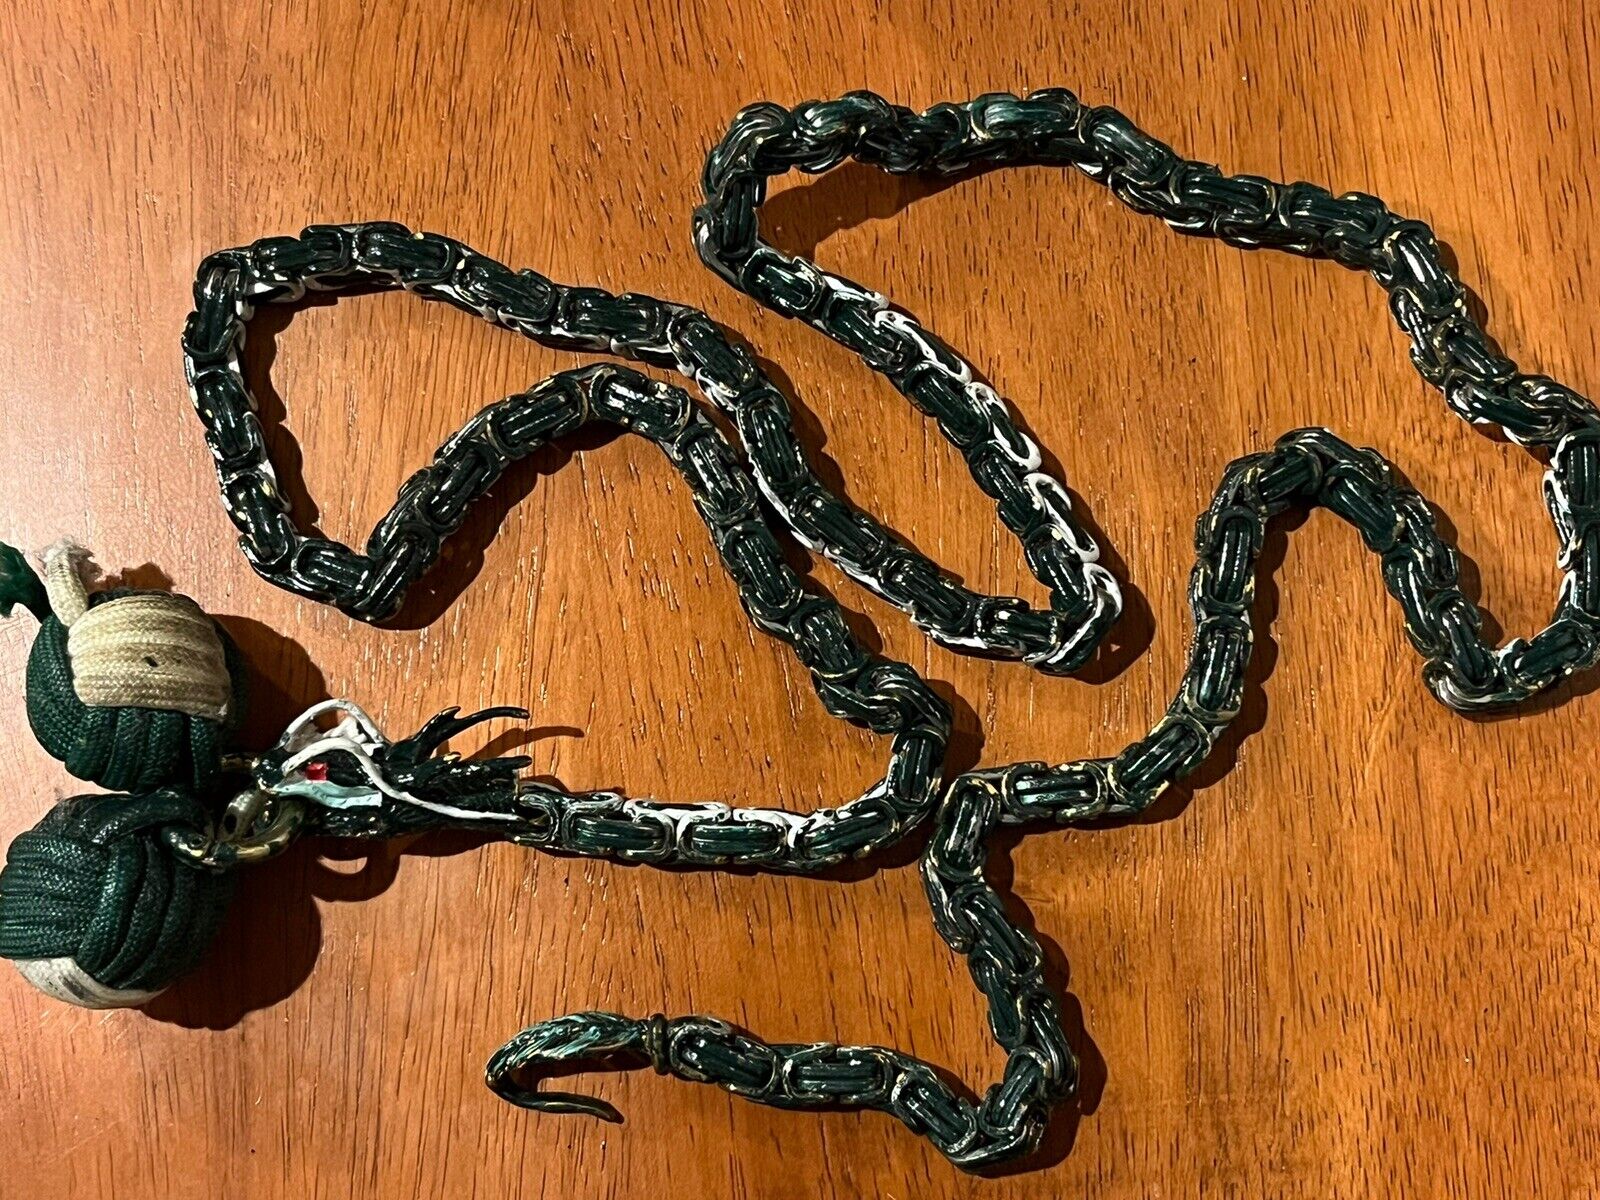 Vintage Dragon Chain With Monkey Balls Weapon, 40 Inches, Unique Self Defence